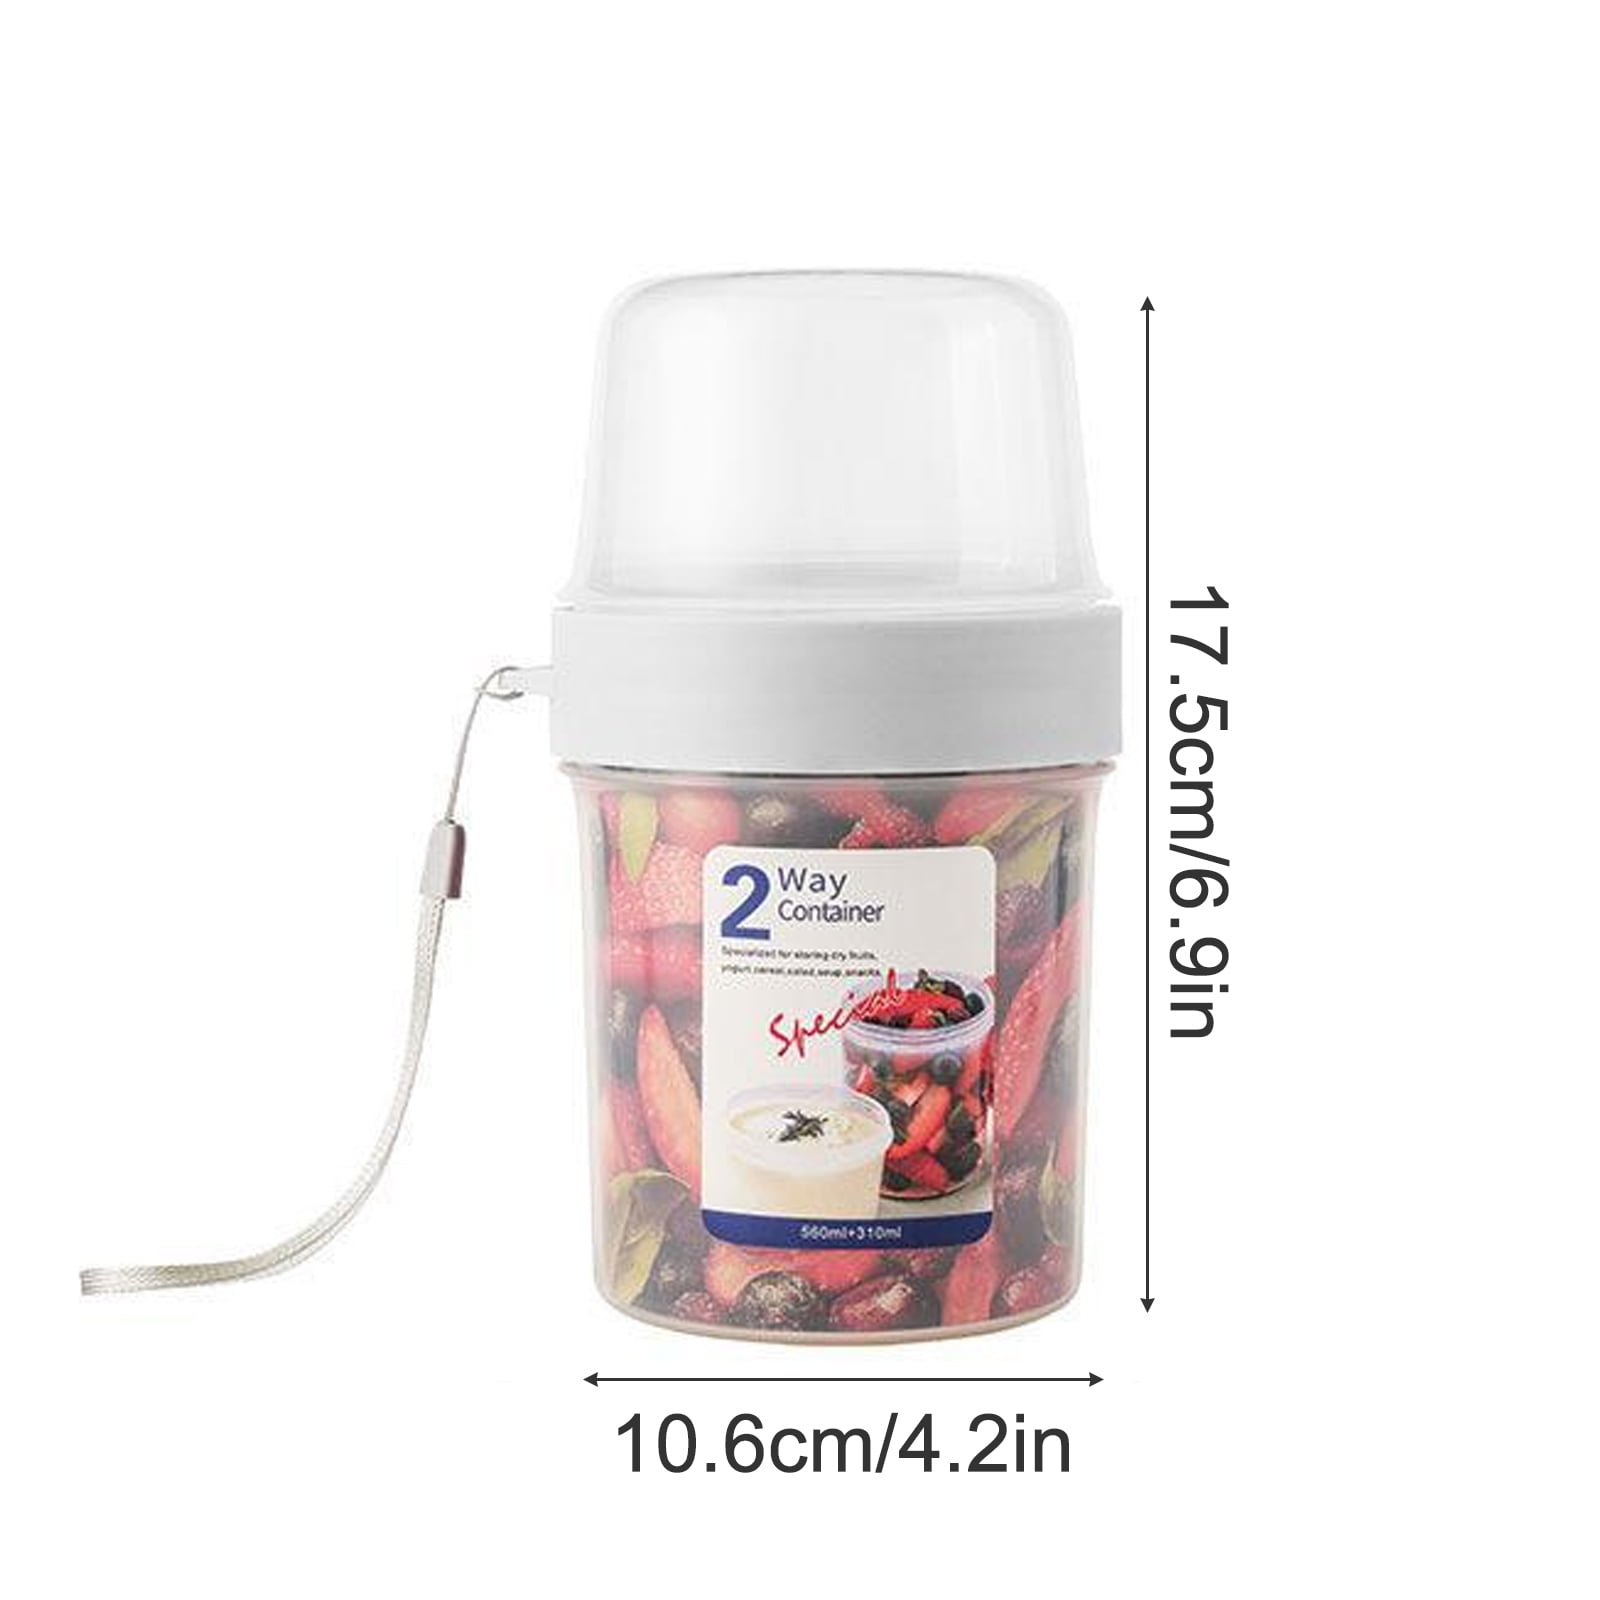 Chilled Cereal To Go Container Crunch Breakfast Cereal Cup